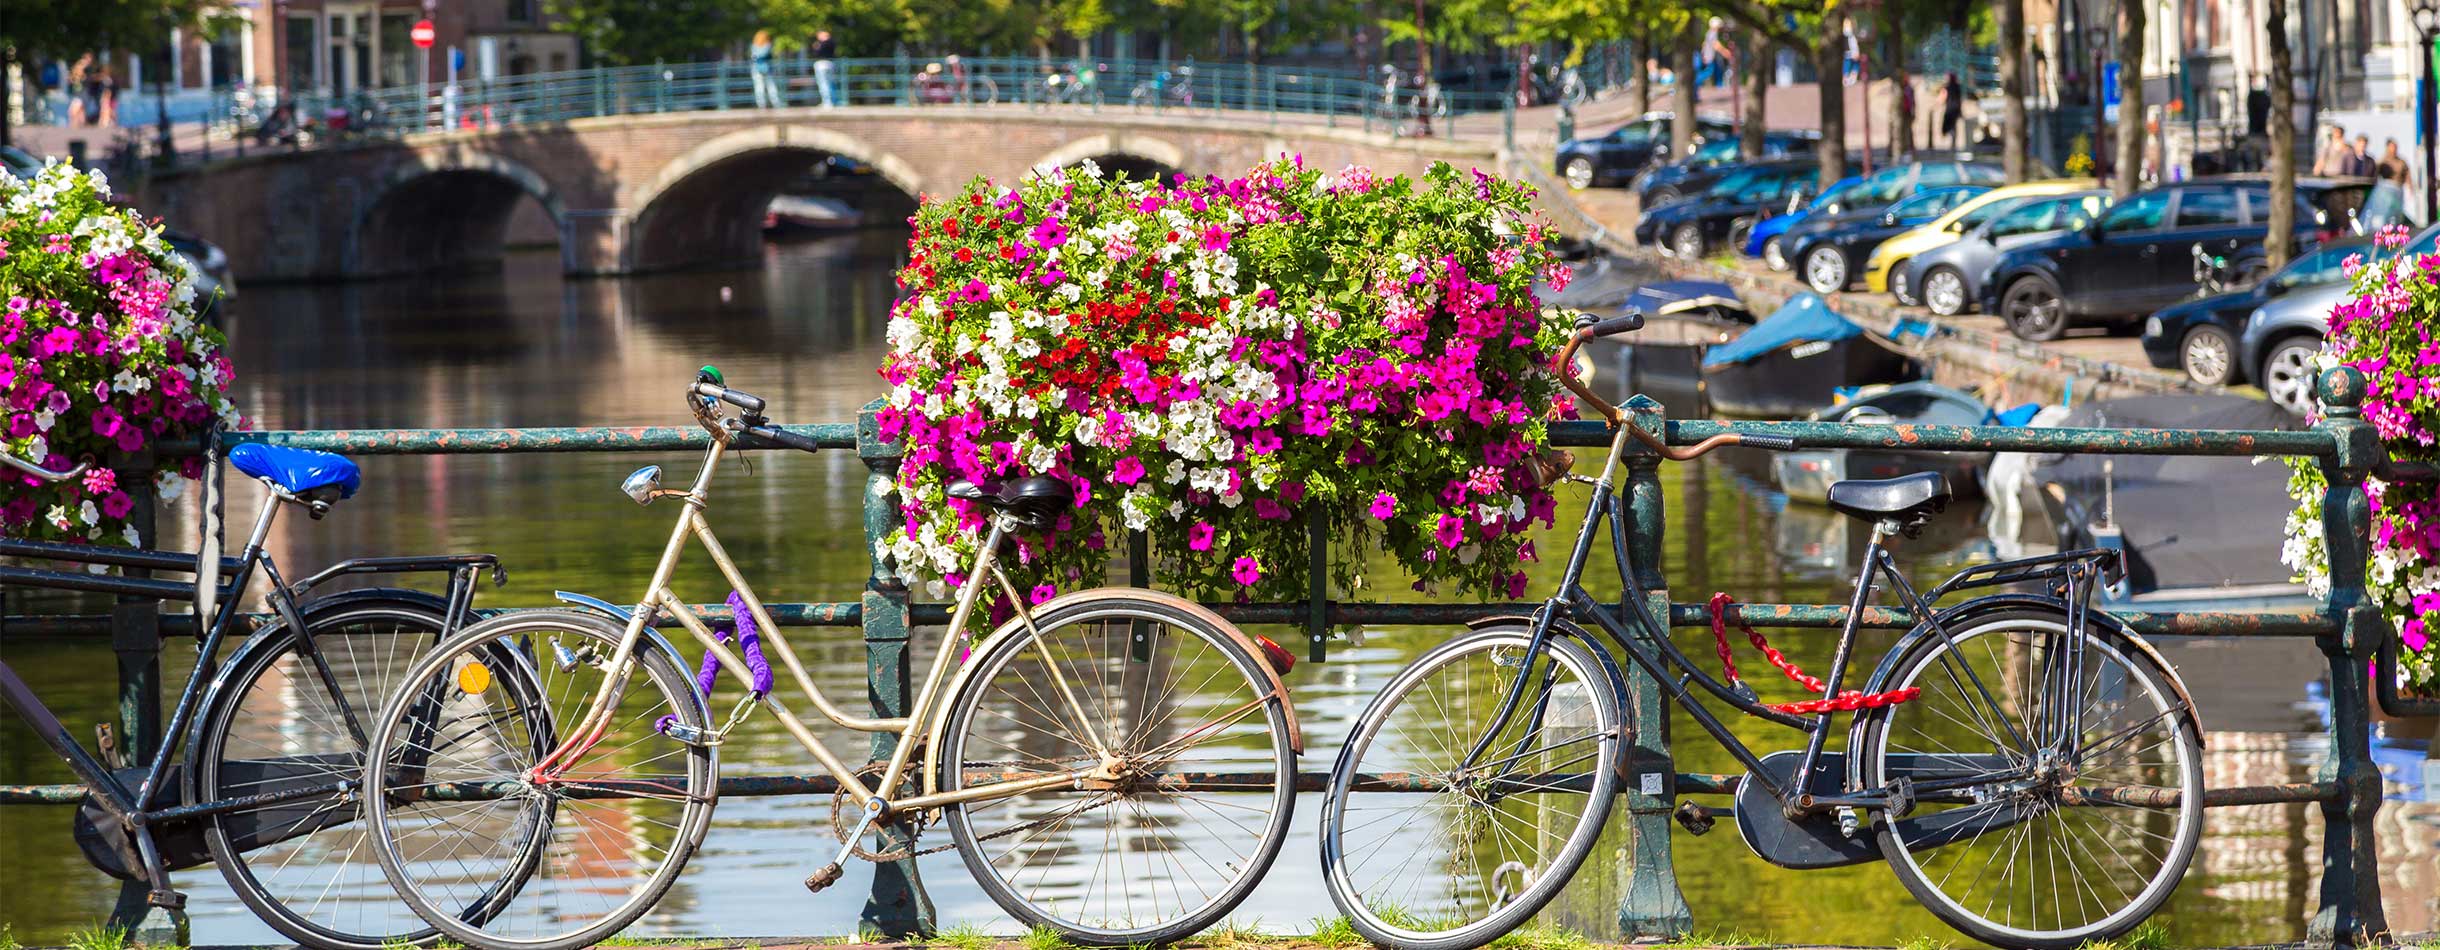 Bicycles over the bride, Amsterdam canals